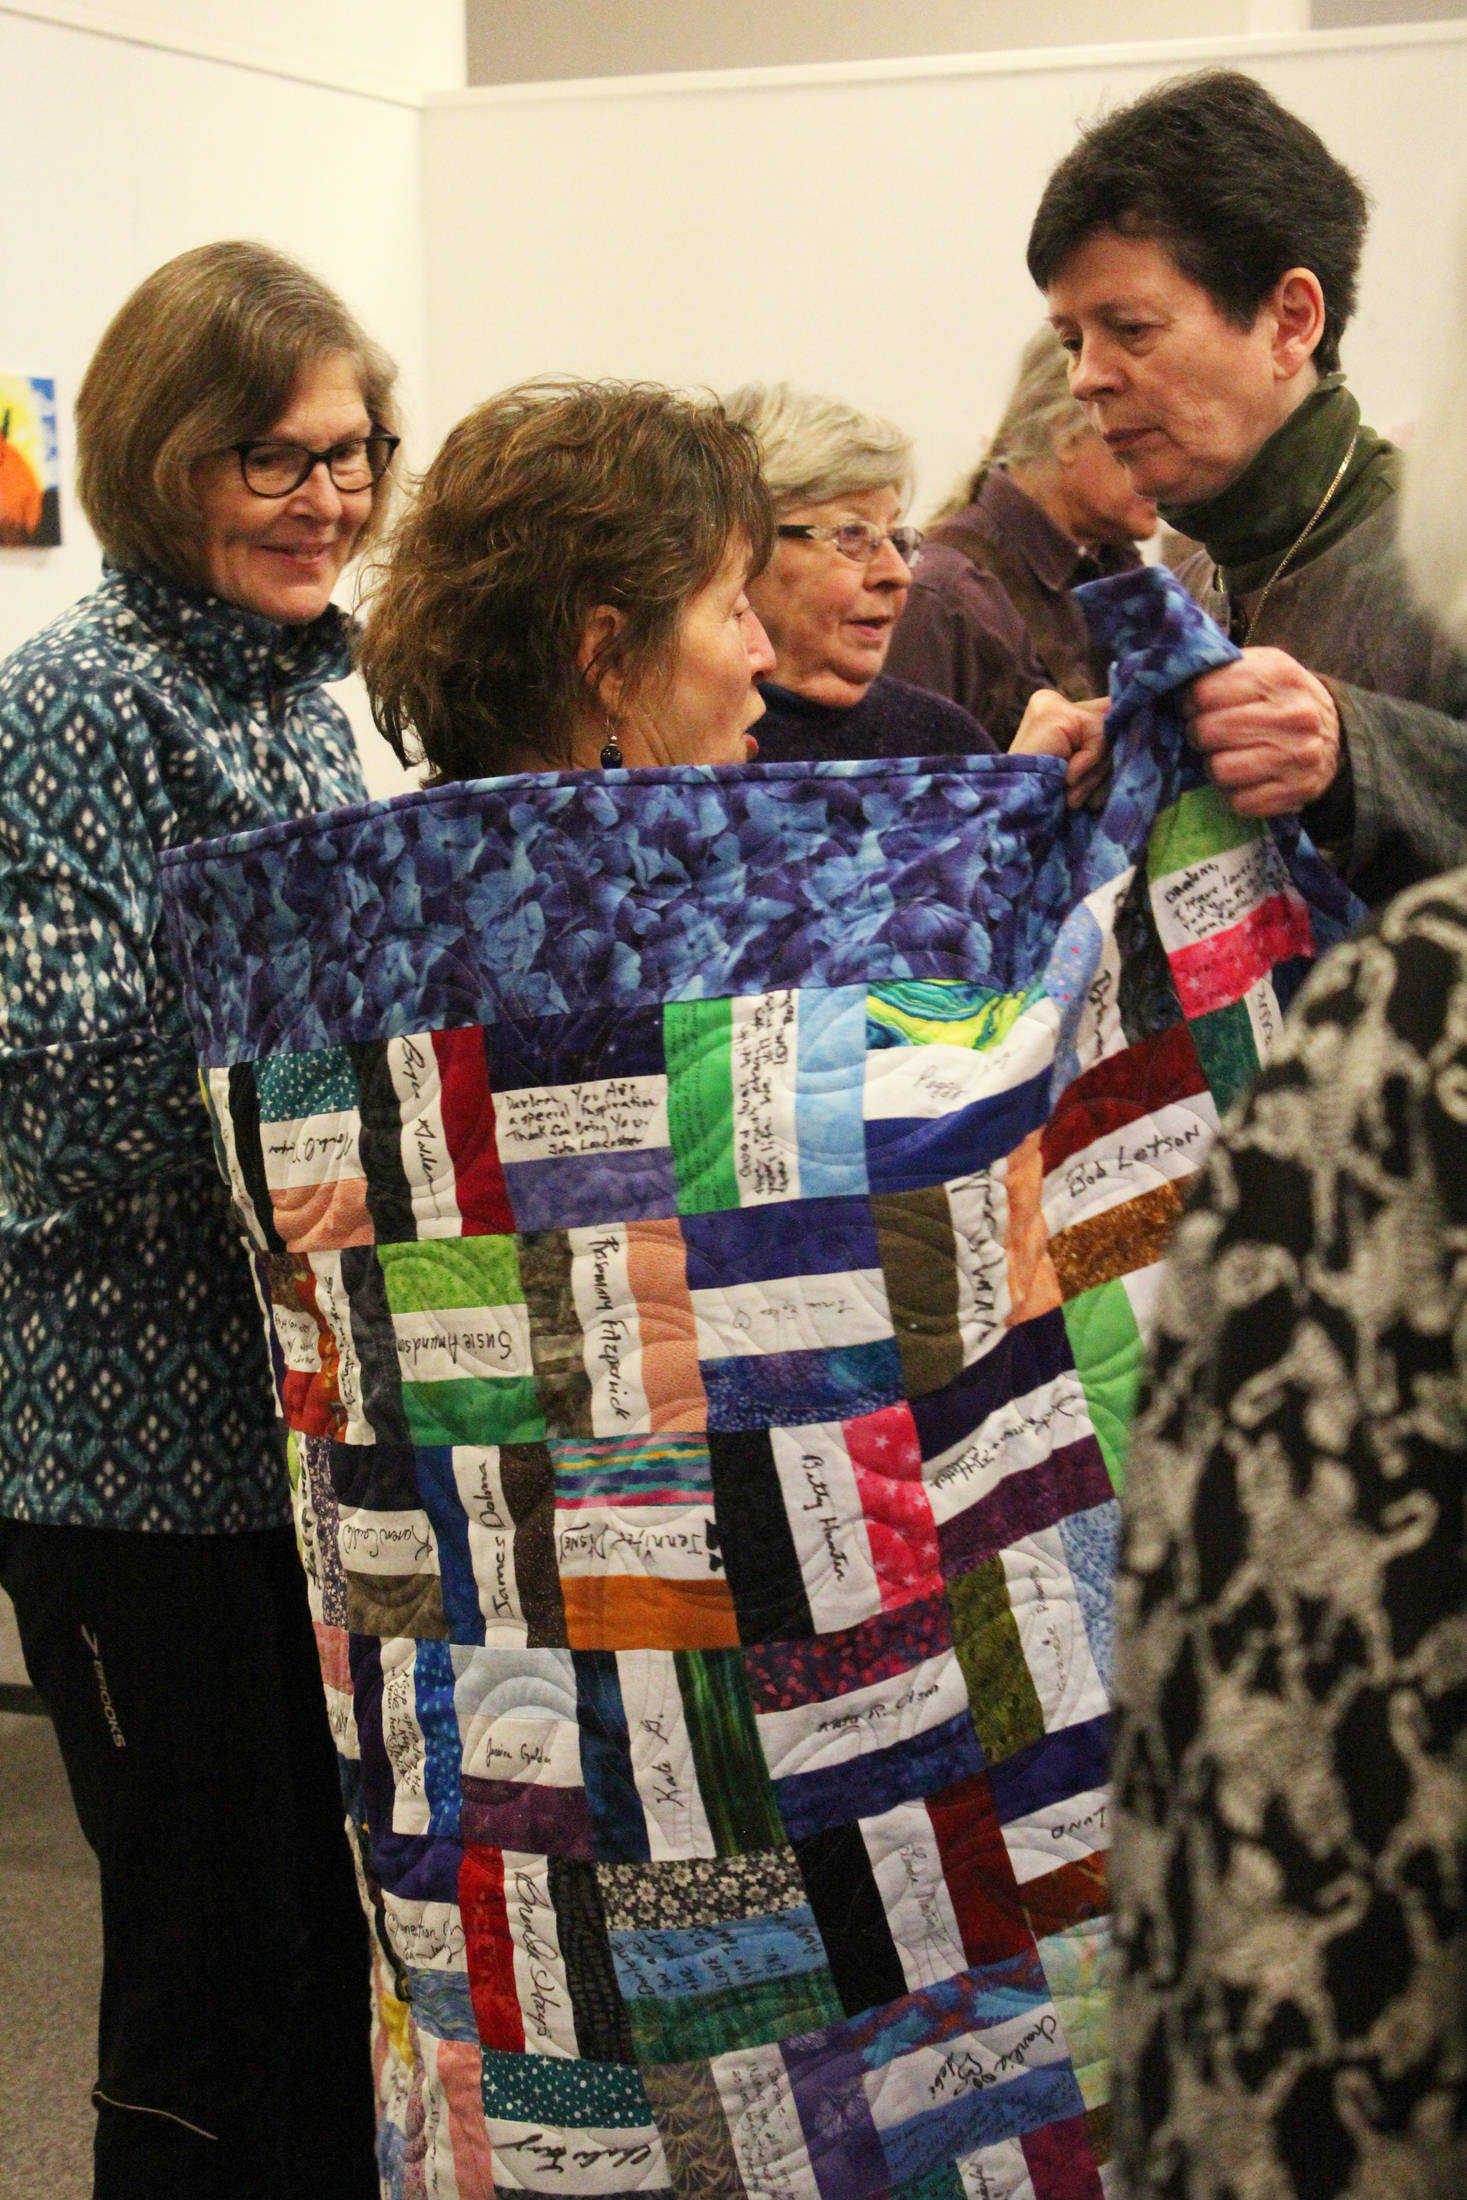 Darlene Hilderbrand wraps up in the quilt made to honor her retirement by Jane Regan, right, at a surprise party Sunday, March 18, 2018 at Homer Council on the Arts in Homer, Alaska. Hilderbrand worked at Hospice of Homer for 19 years. (Photo by Megan Pacer/Homer News)